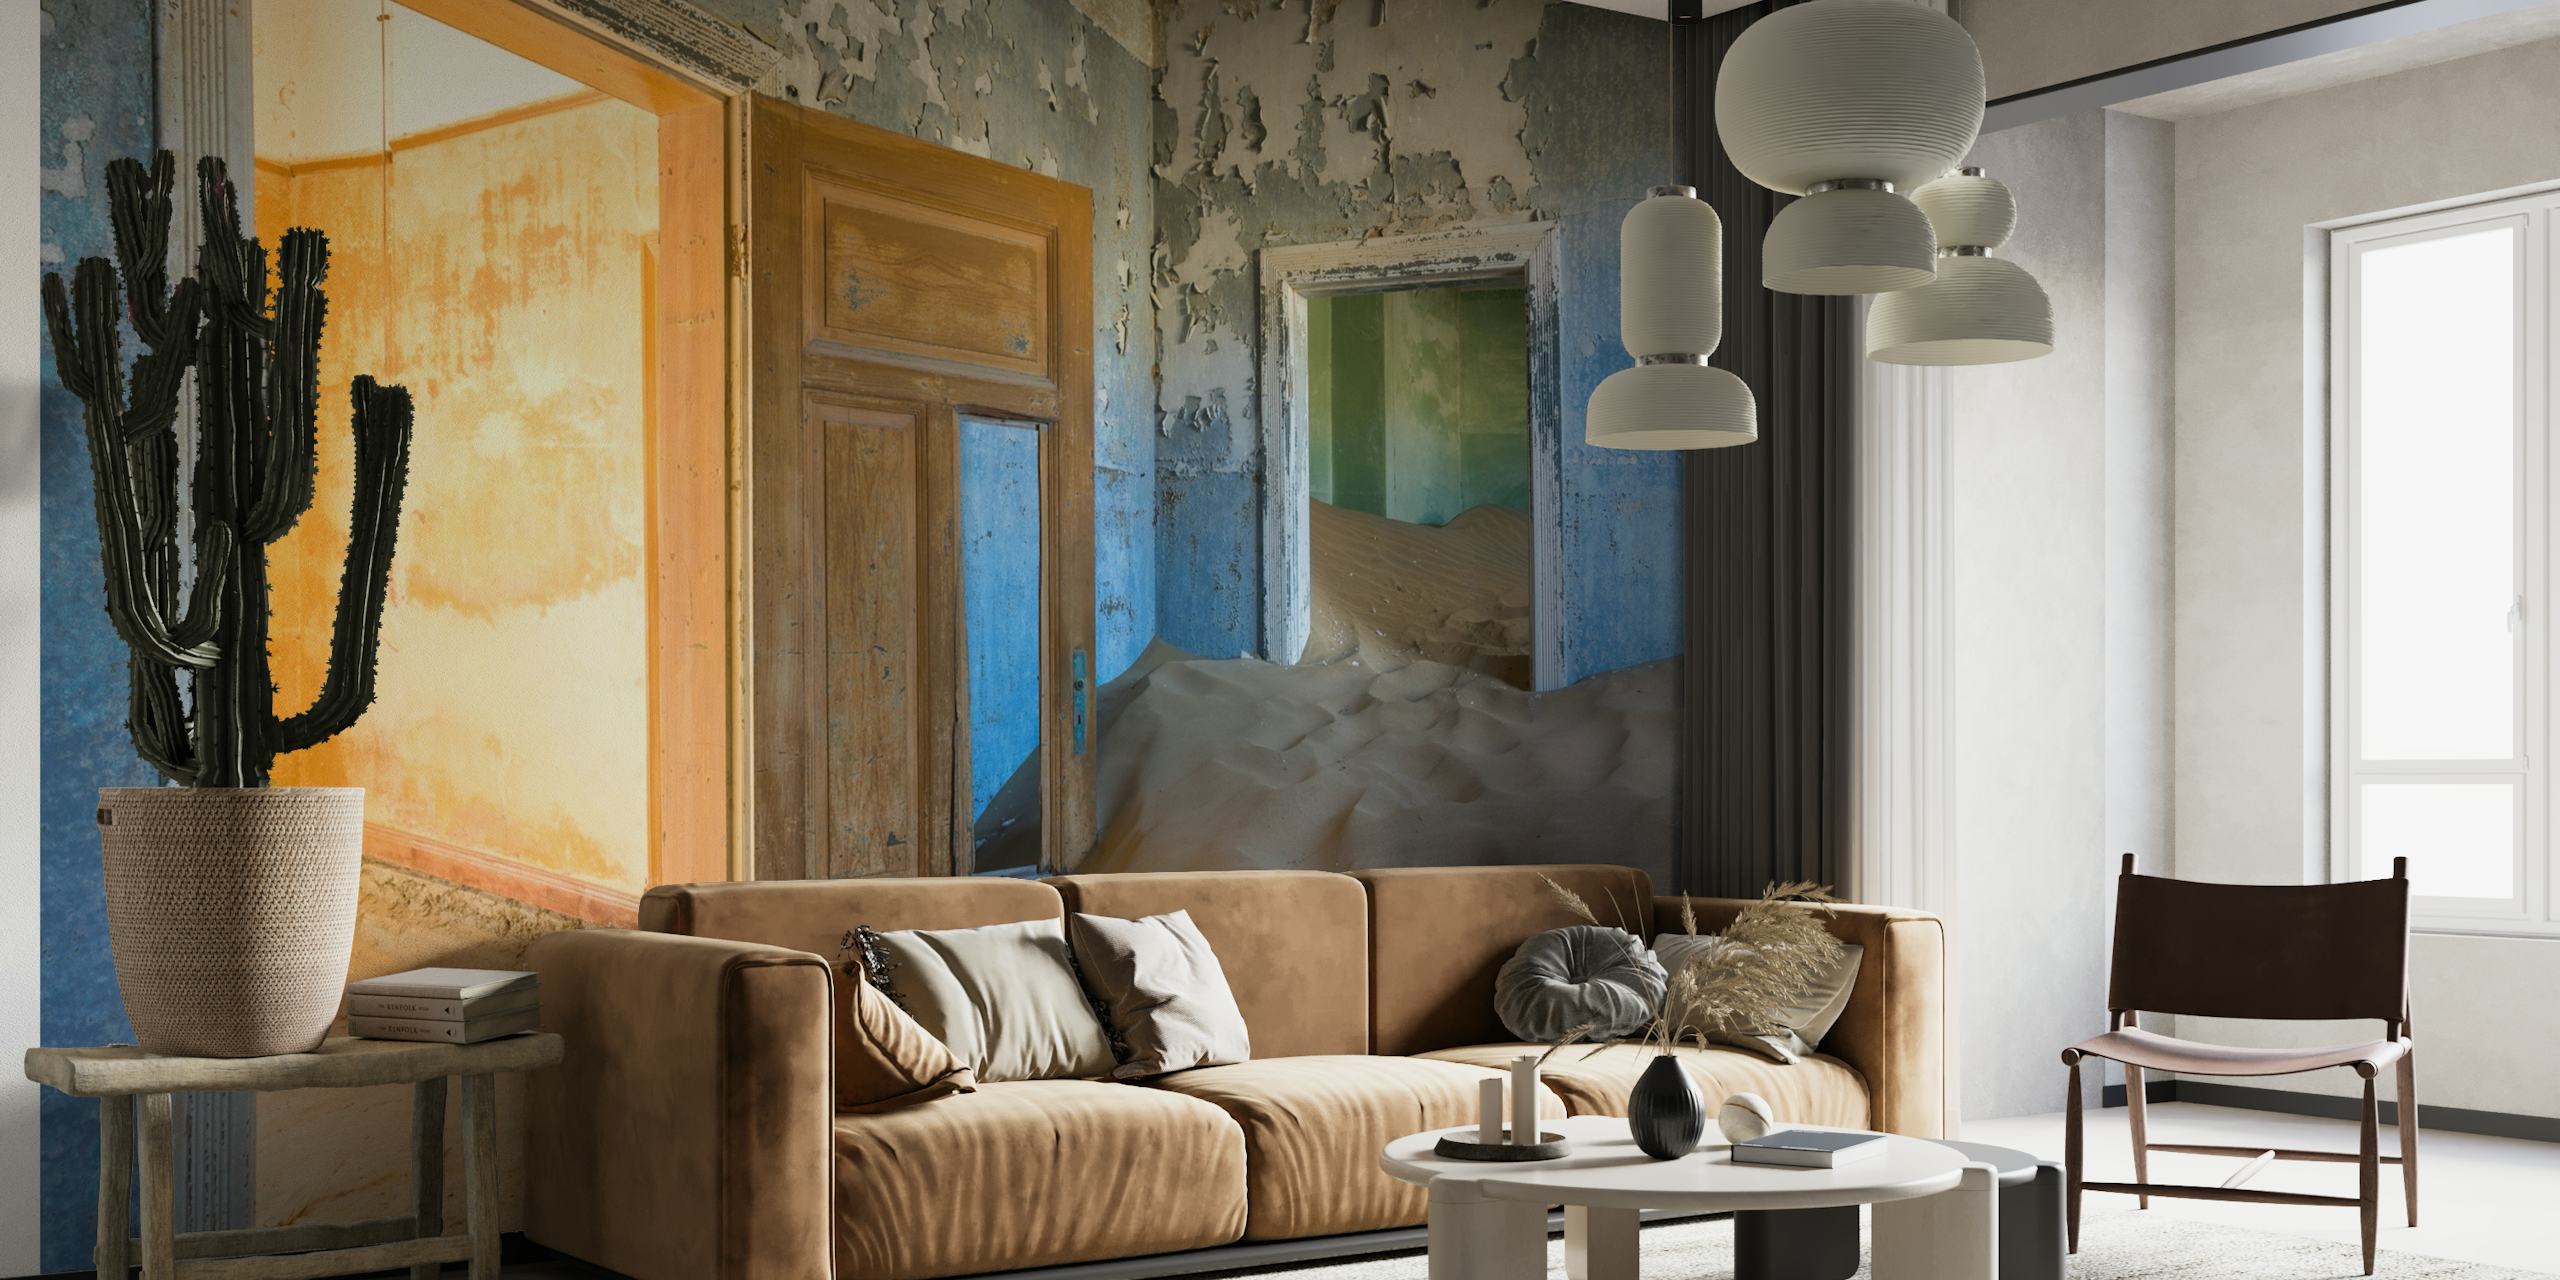 Abandoned room with sand on the floor and sunlight shining through doorways wall mural